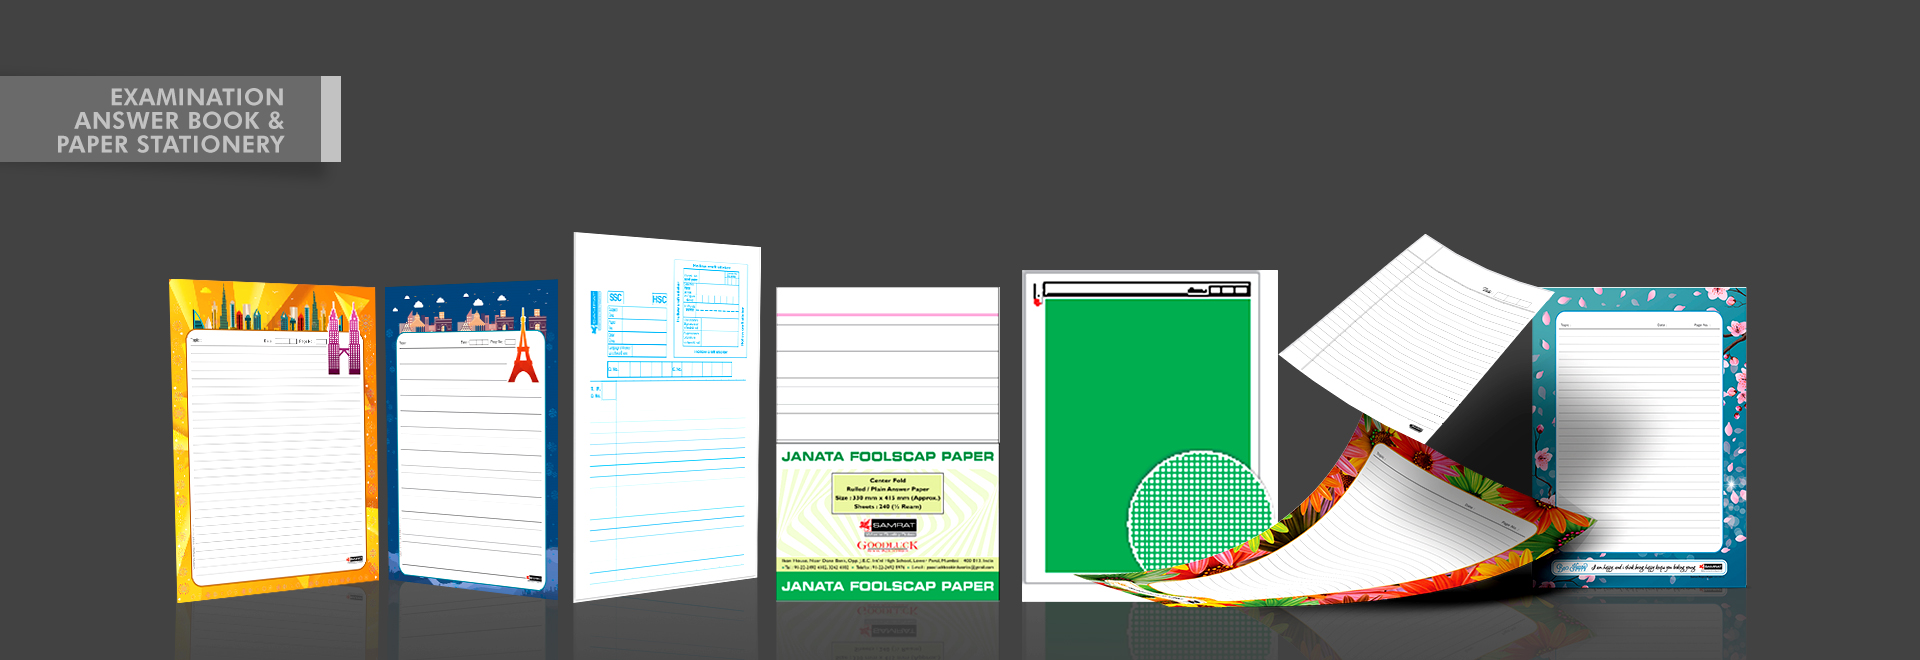 EXAMINATION ANSWER BOOK & PAPER STATIONERY